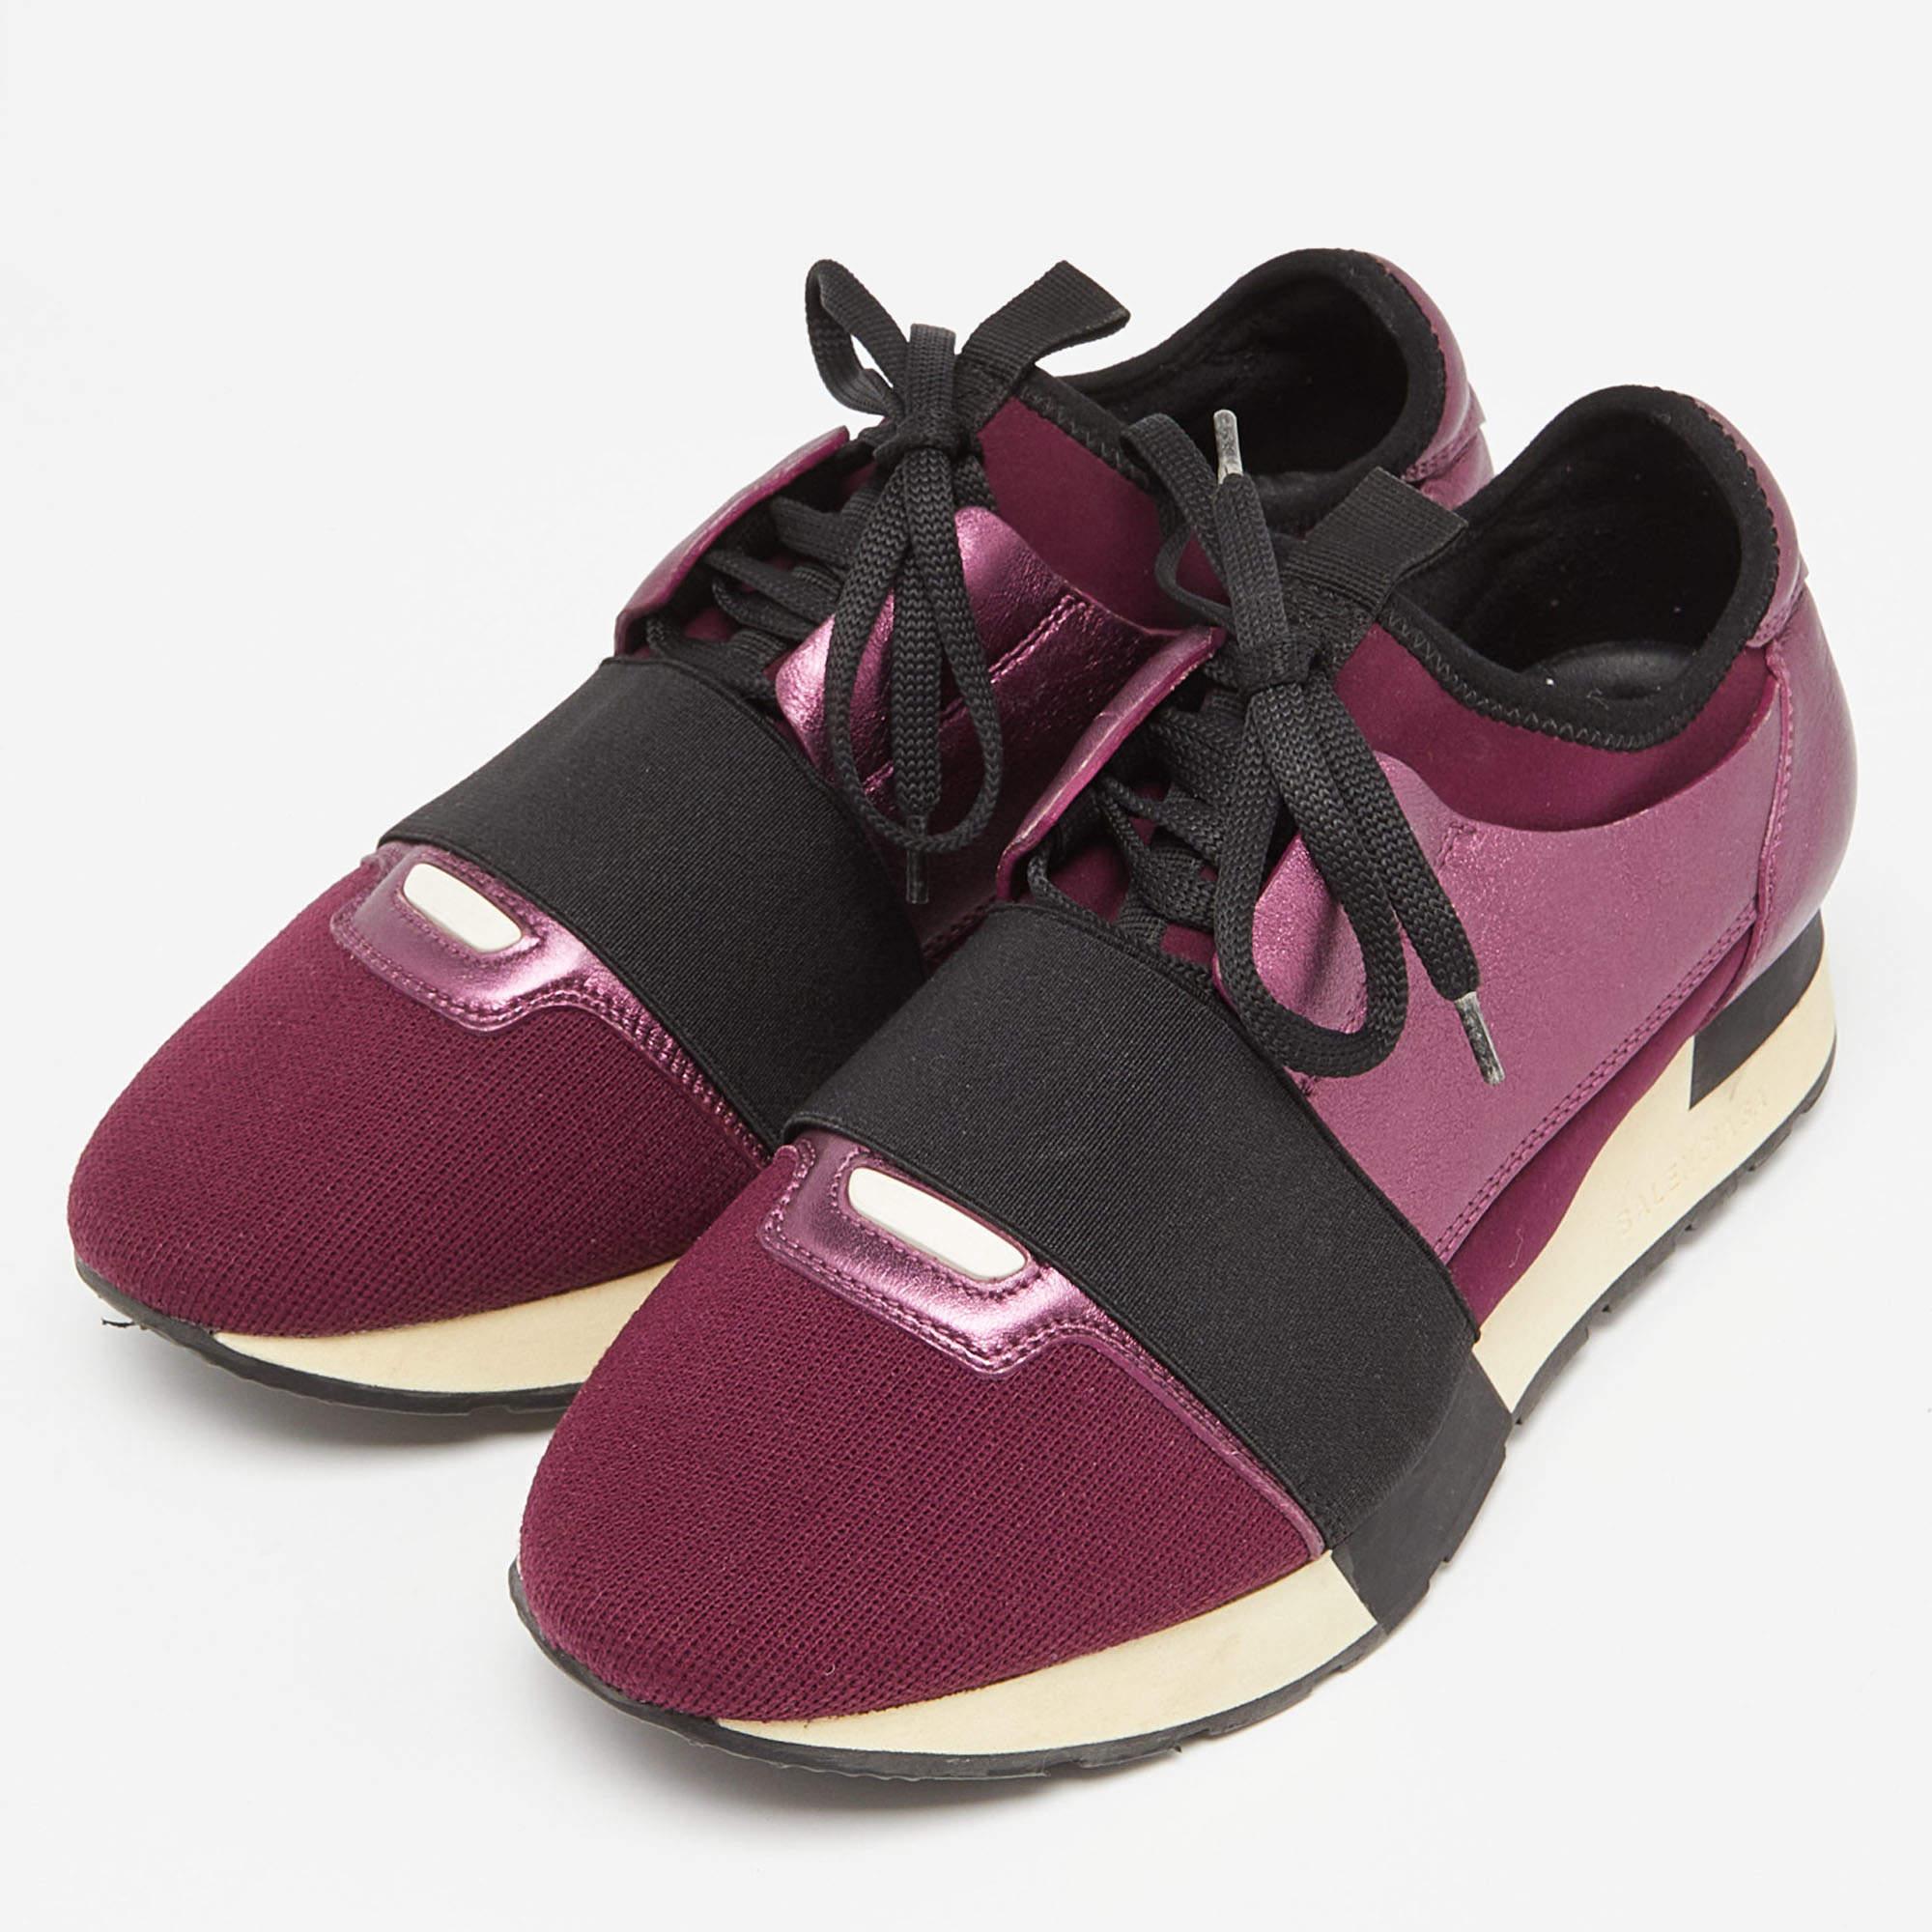 Balenciaga Purple Leather and Neoprene Race Runner Sneakers Size 38 For Sale 5